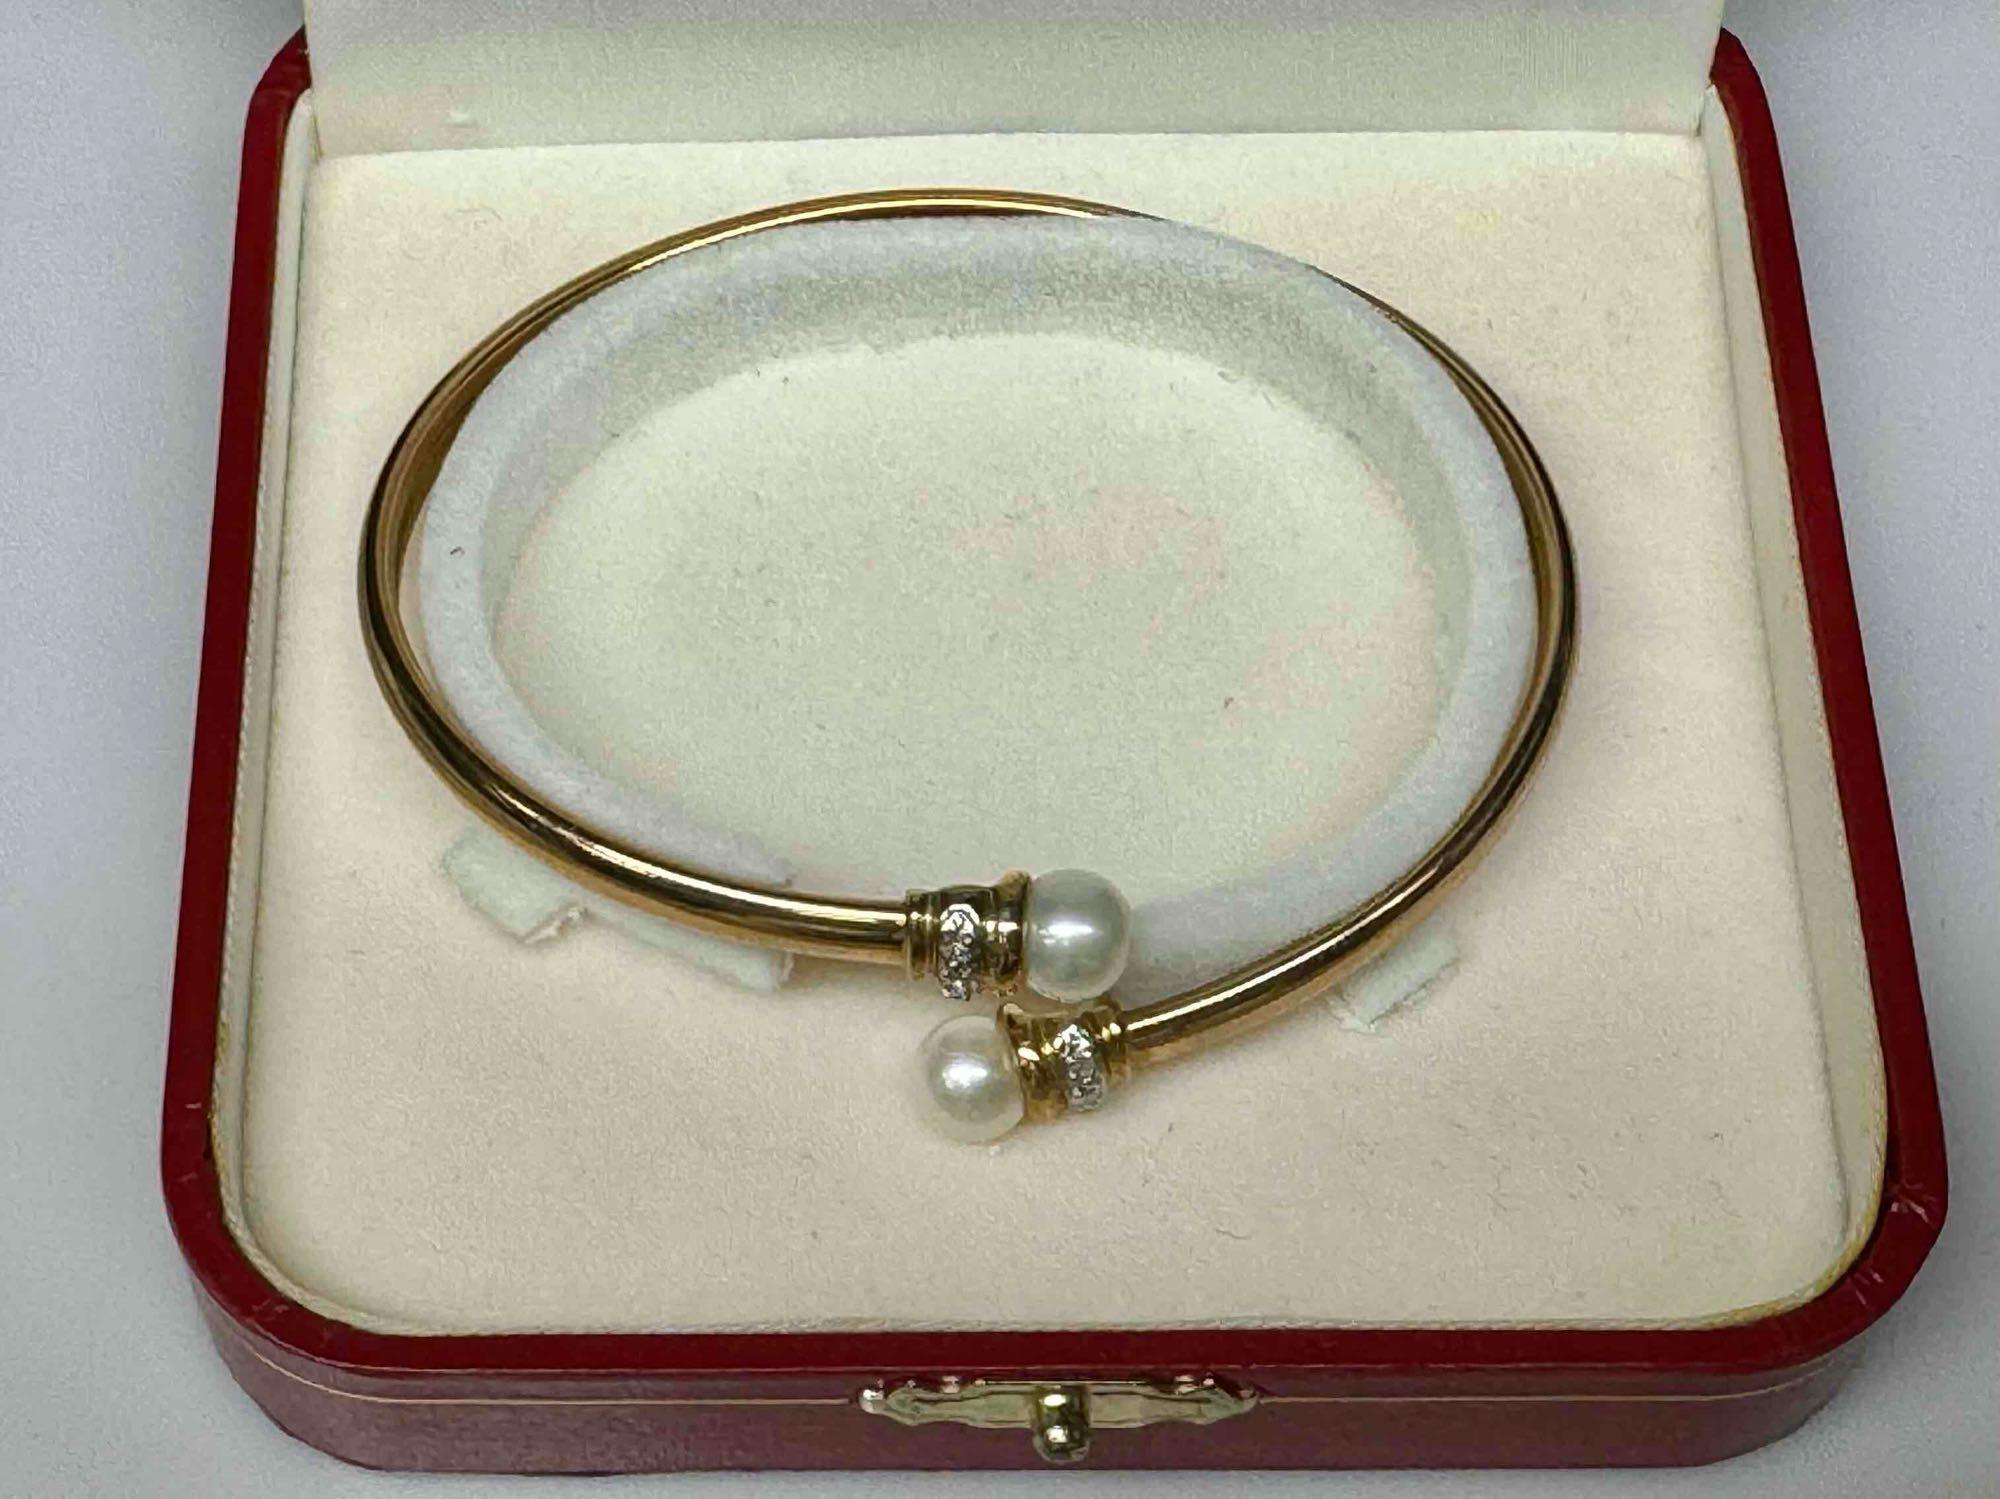 Fancy 10k Gold Diamond and Pearl Bracelet with Box 5.7g total